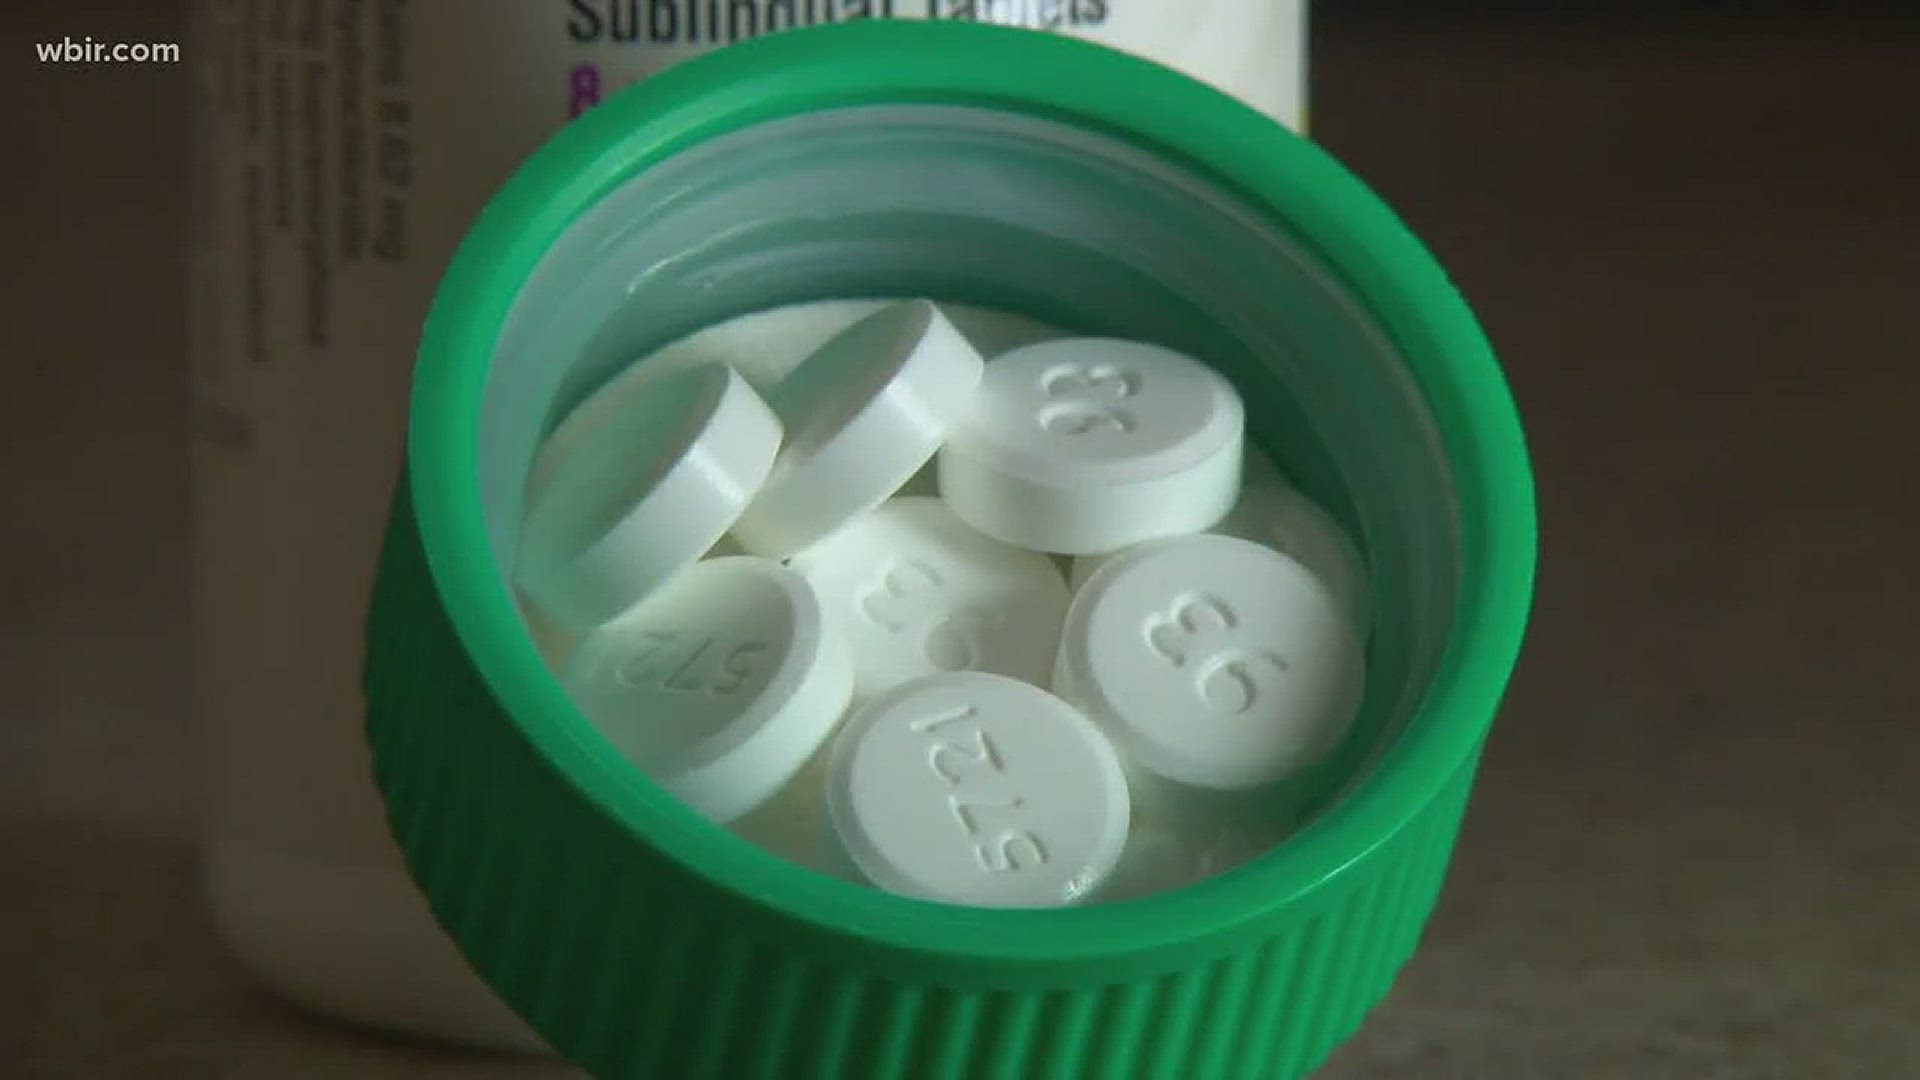 Jan. 23, 2018: Three months after President Donald Trump declared a public health emergency to fight the opioid epidemic, state and local officials say they've seen little external progress beyond the efforts that were already underway.